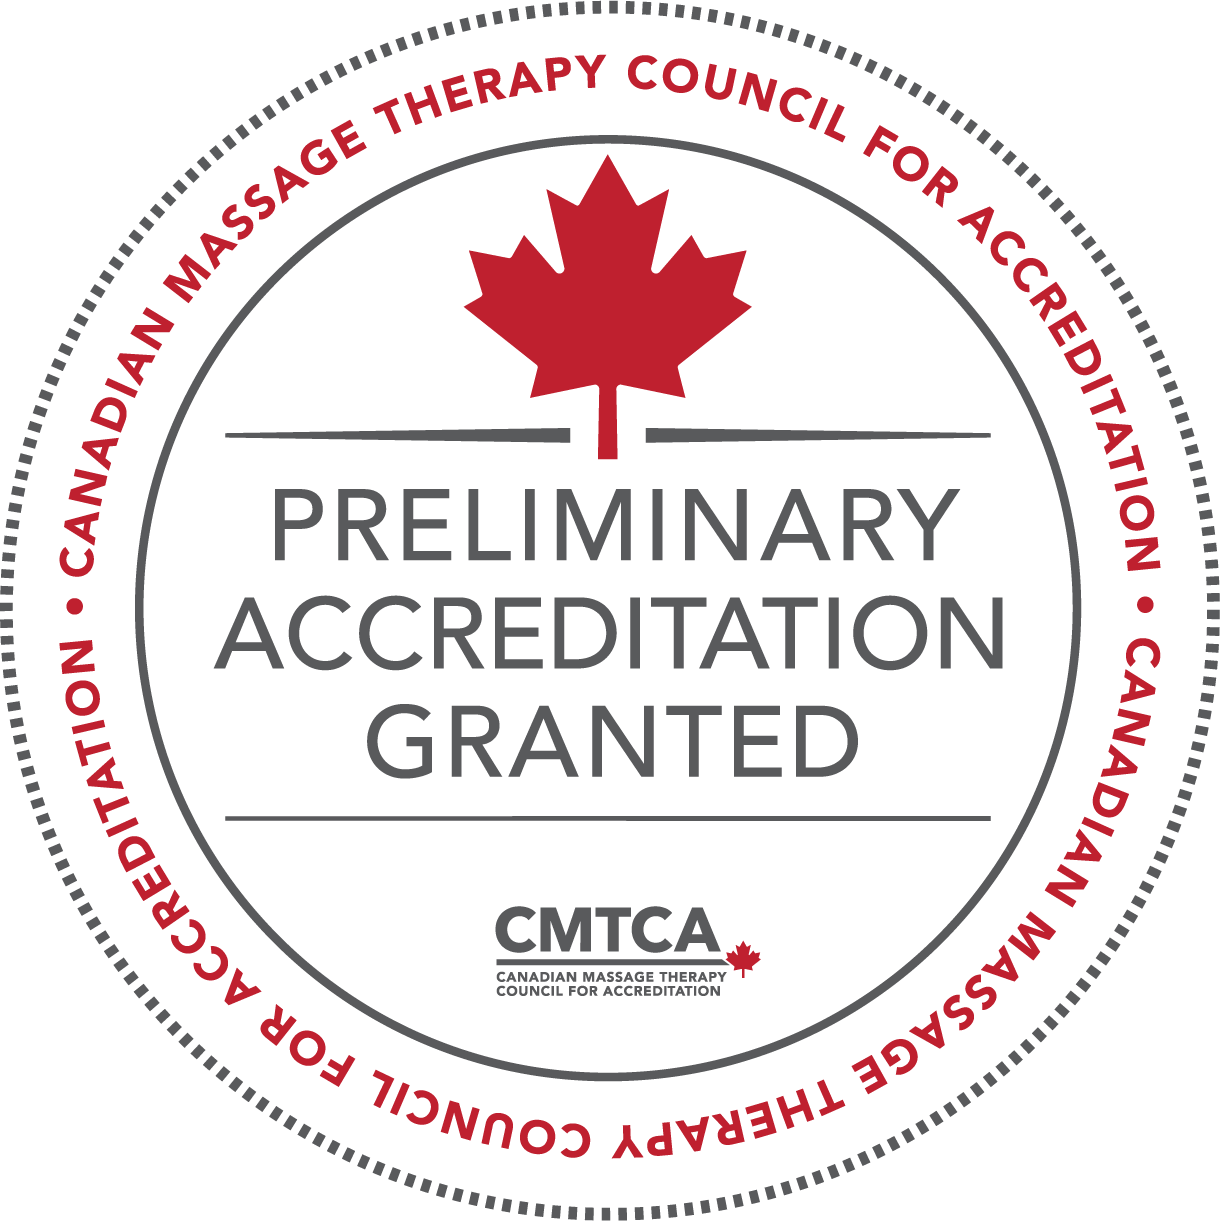 Canadian Massage Therapy Council of Accreditation Preliminary Accreditation Seal